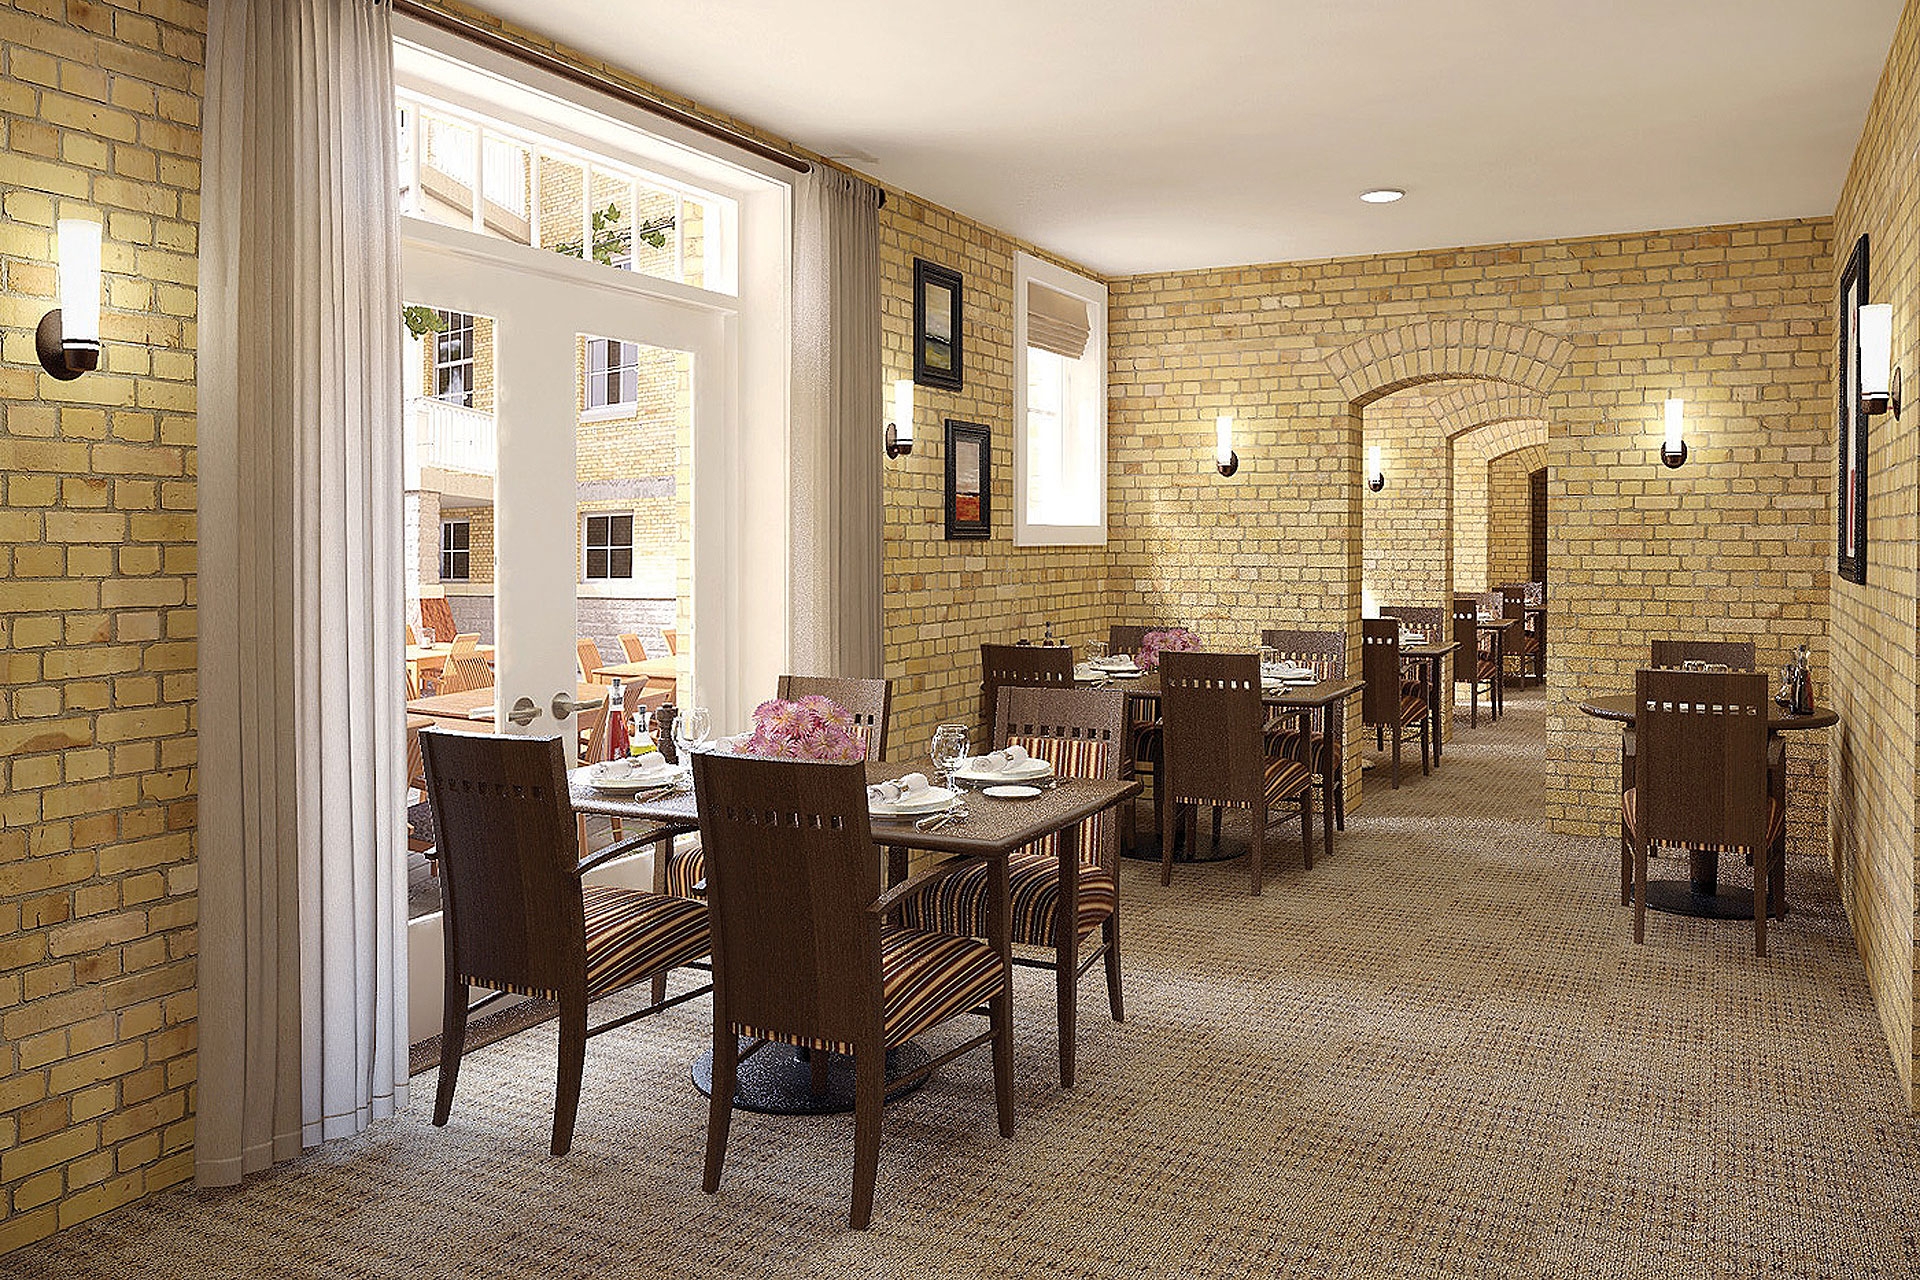 For the seniors living in this assisted living  community, we've designed dining pockets next to the windows around the courtyard